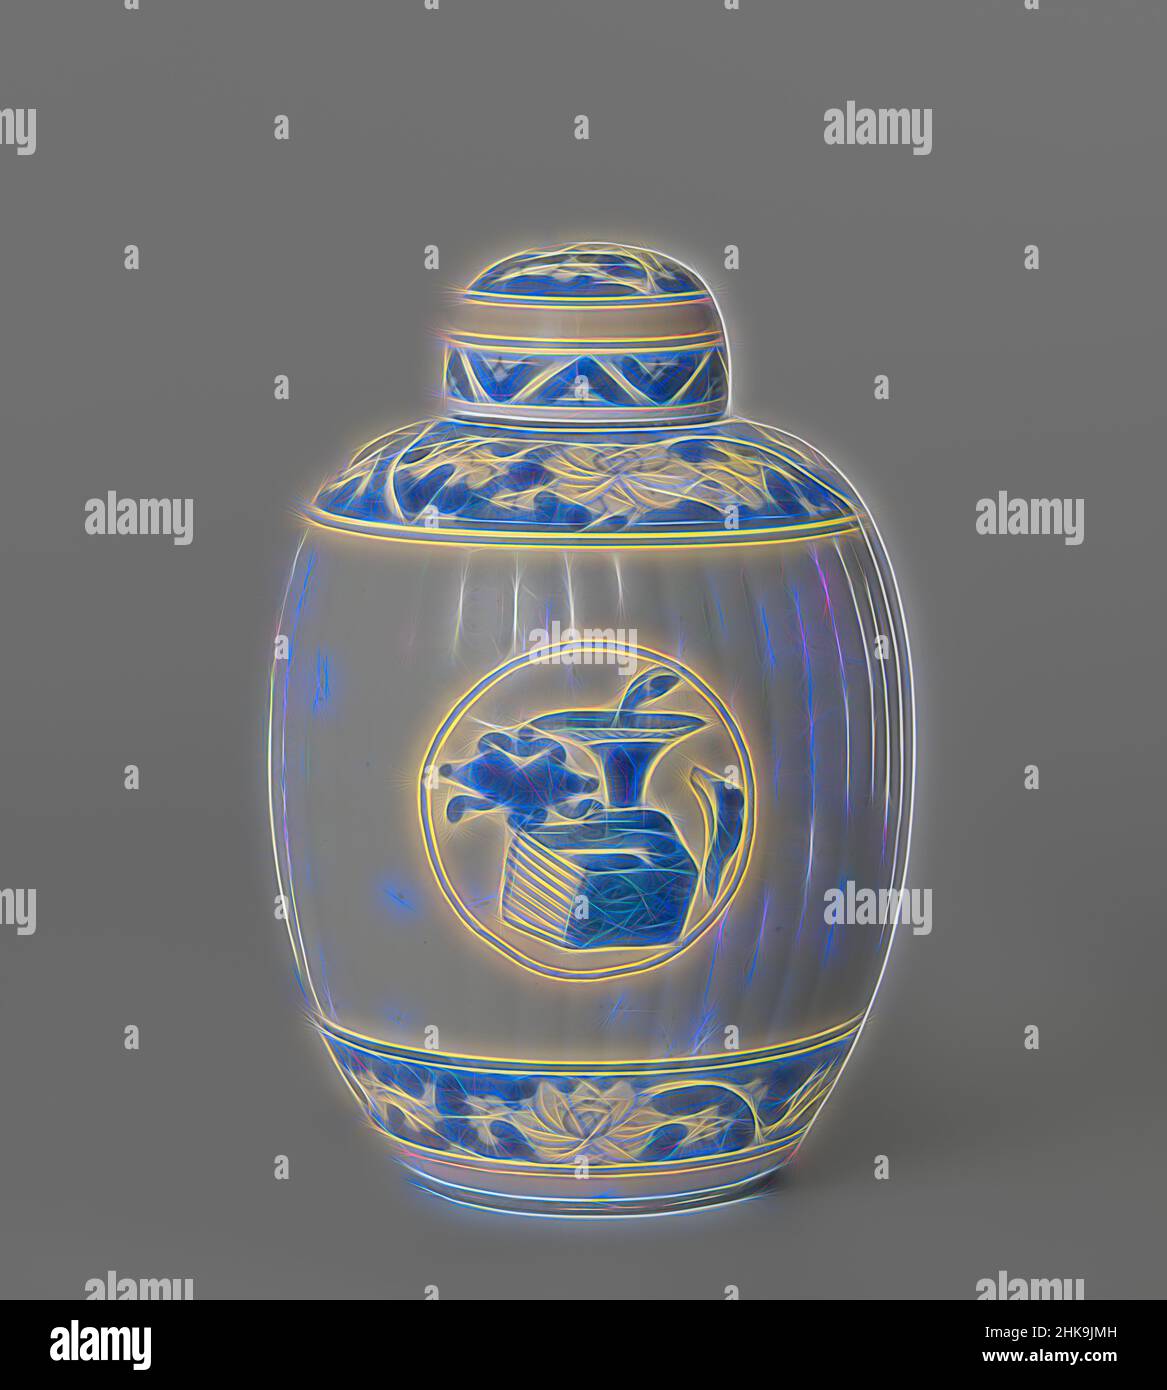 Inspired by Ovoid fluted covered jar with precious objects in medallions and floral scrolls, Ovoid lidded jar with fluted wall, painted in underglaze blue. Carved into the ribbed wall medallions with precious objects. On the shoulder and above the foot a blue band with carved out floral scrolls. The, Reimagined by Artotop. Classic art reinvented with a modern twist. Design of warm cheerful glowing of brightness and light ray radiance. Photography inspired by surrealism and futurism, embracing dynamic energy of modern technology, movement, speed and revolutionize culture Stock Photo